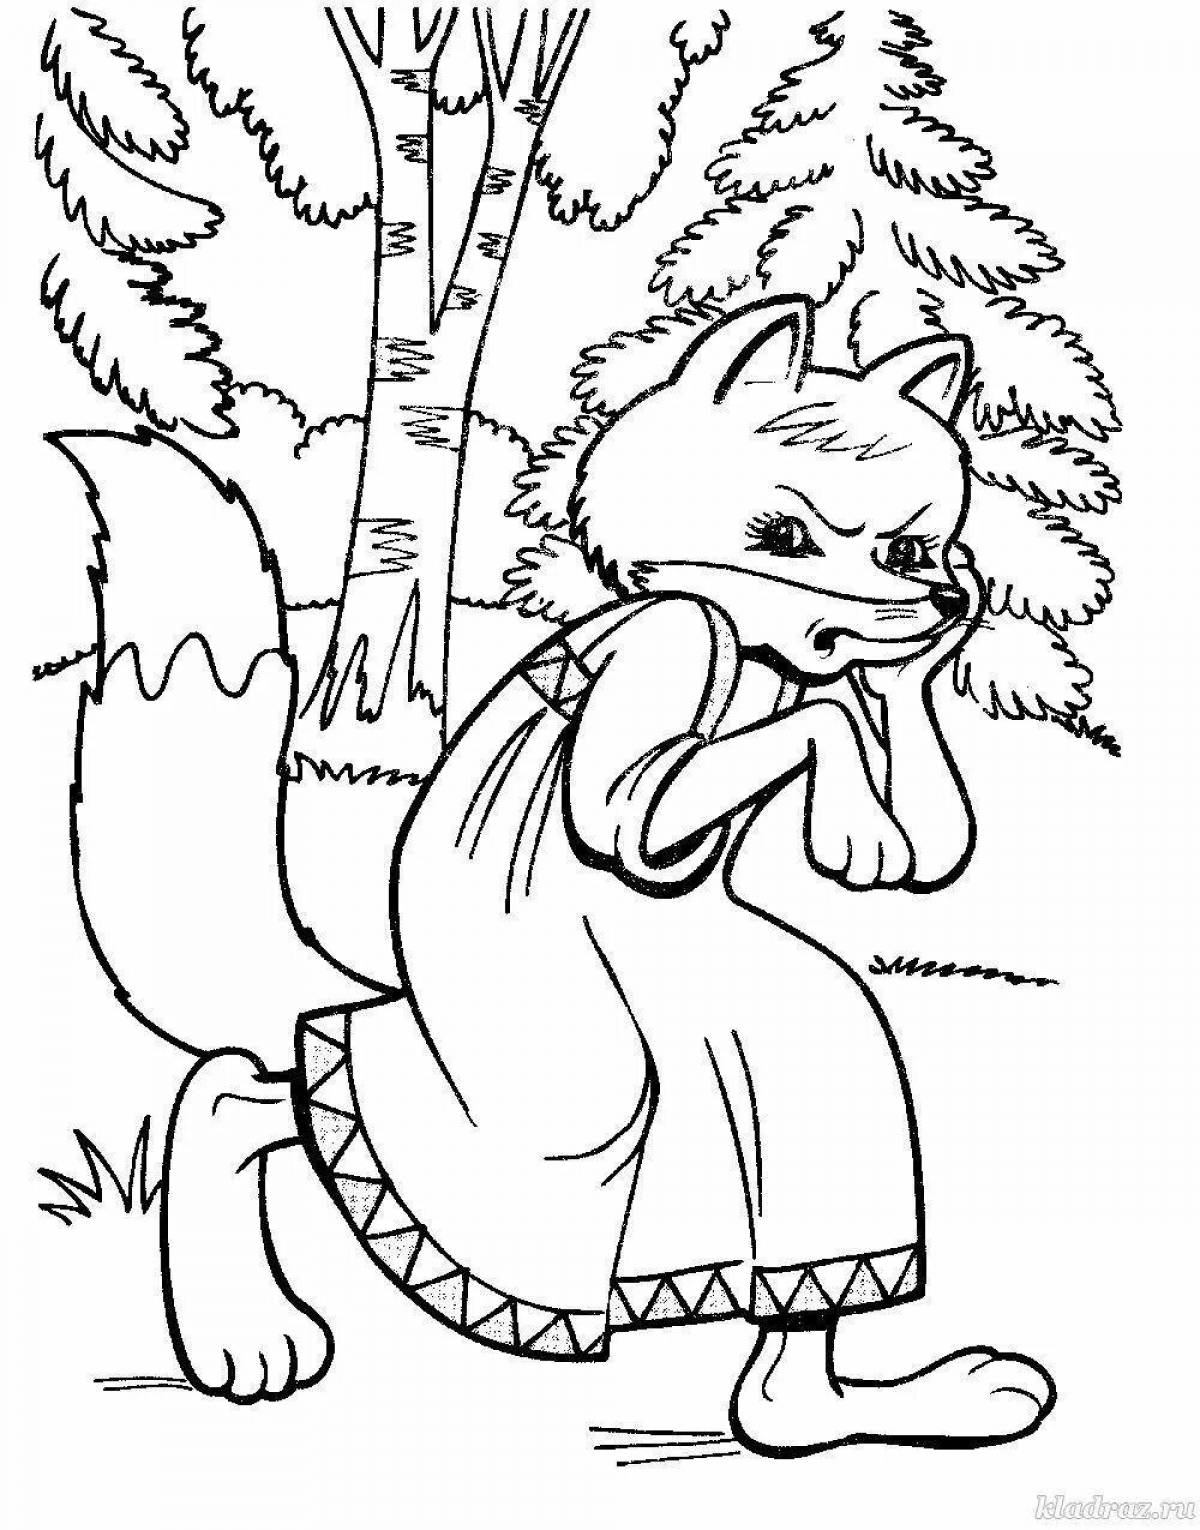 Fancy coloring fox and rooster Russian folk tale